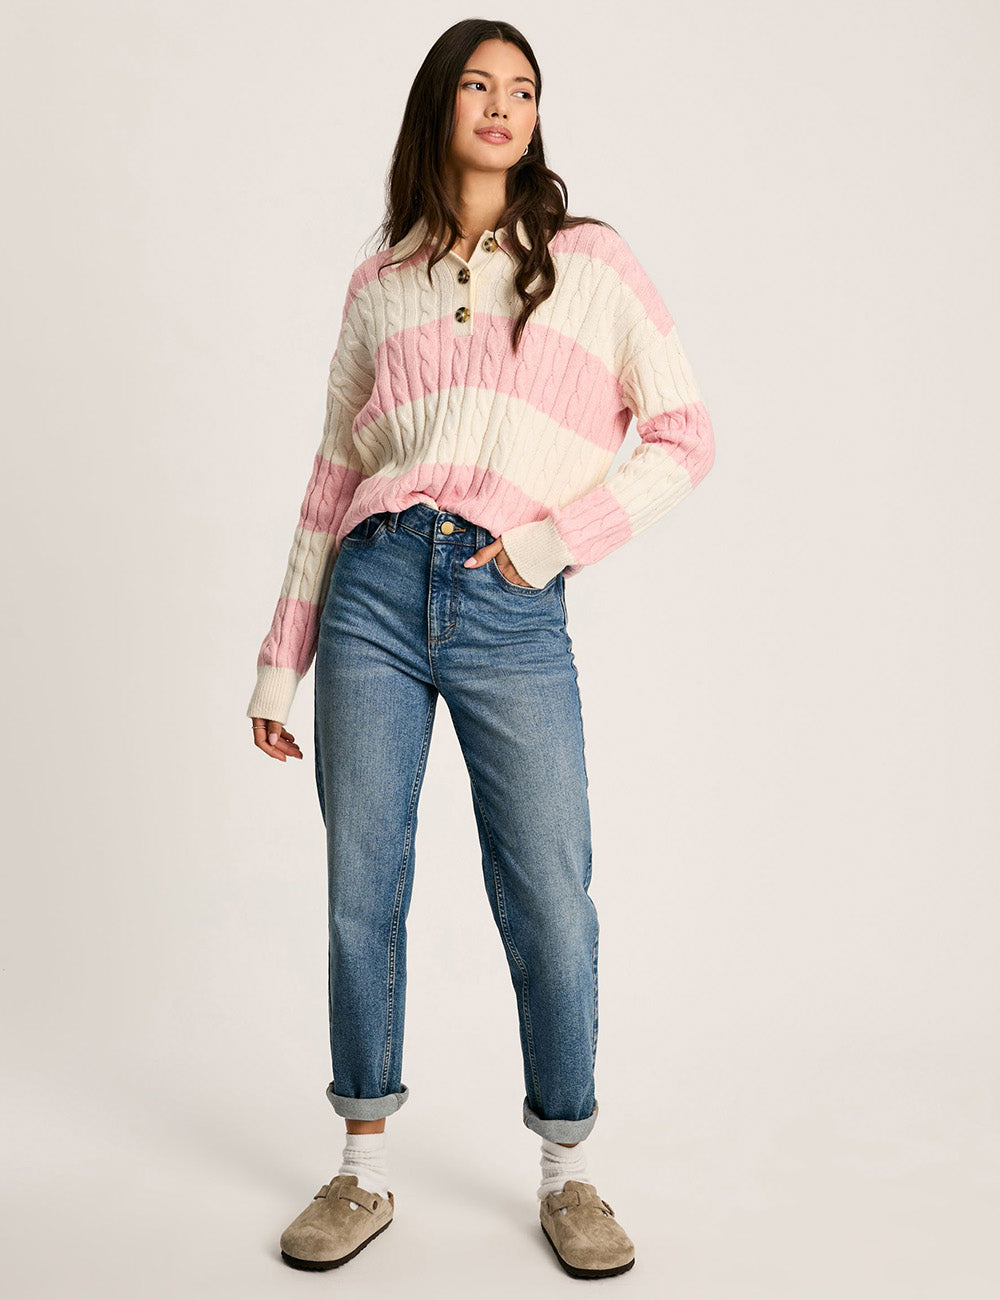 Joules Love All Jumper - Pink Stripe